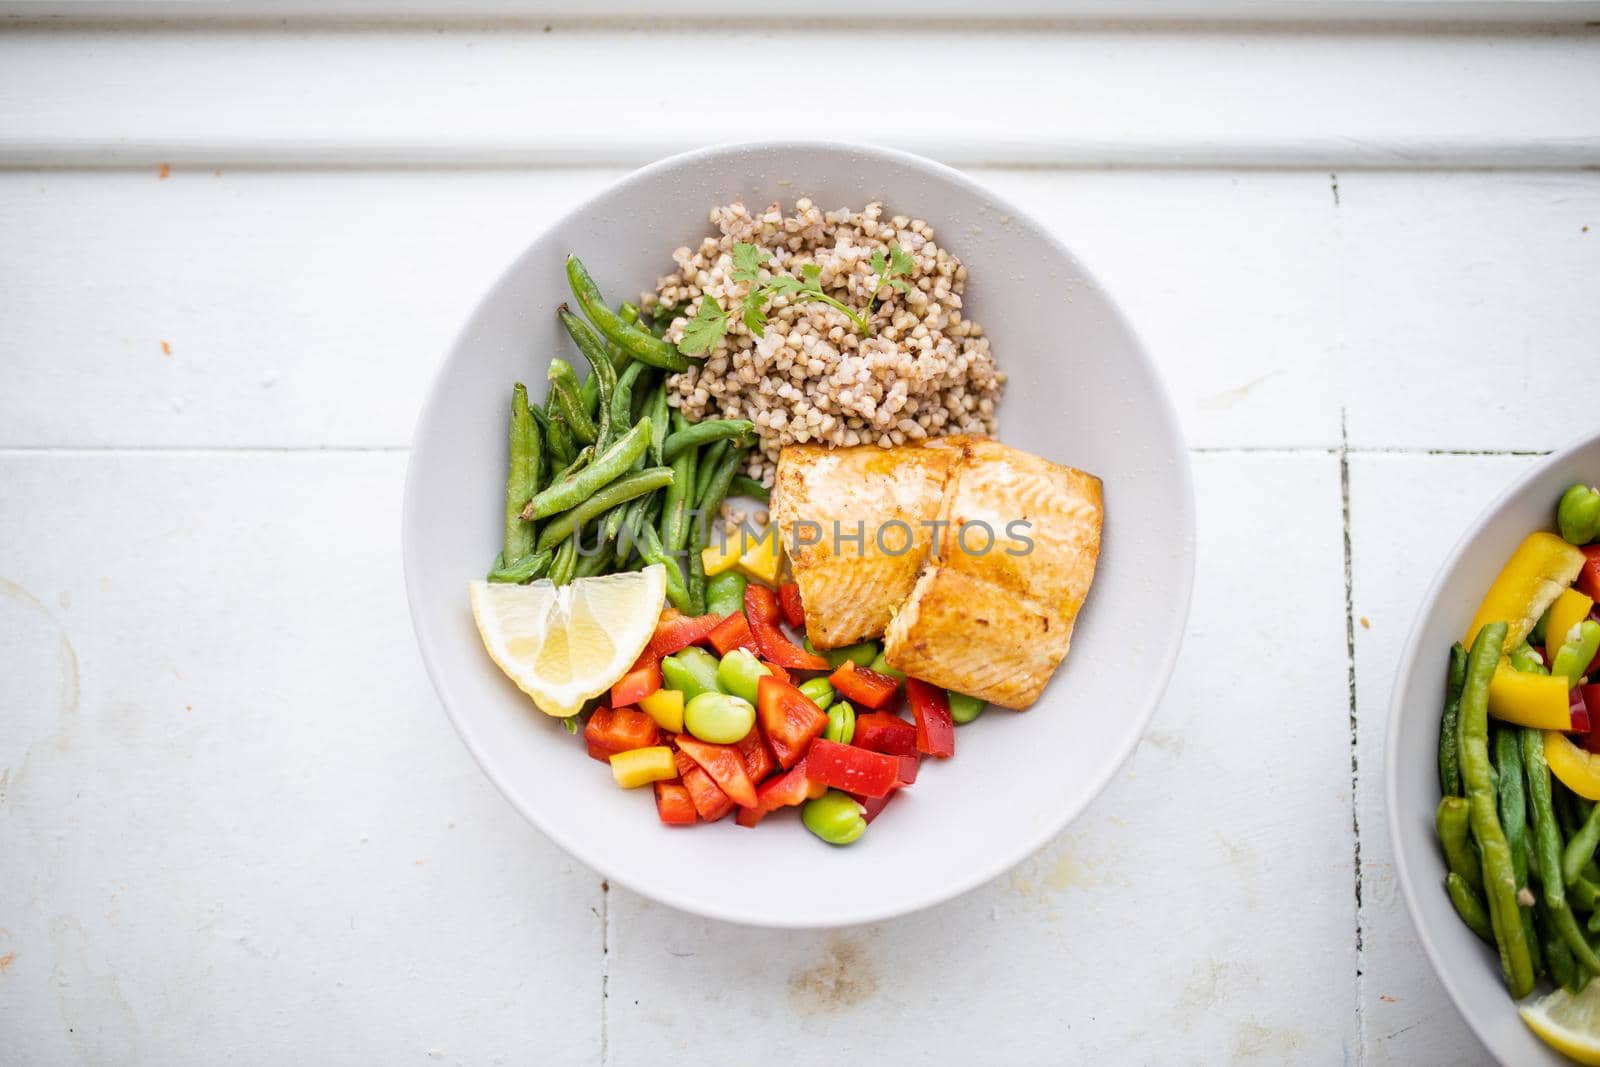 Top view of salmon and buckwheat dish with green beans, broad beans, and tomato slices. Nutritious dishes with vegetables and fish from above. Healthy balanced diet